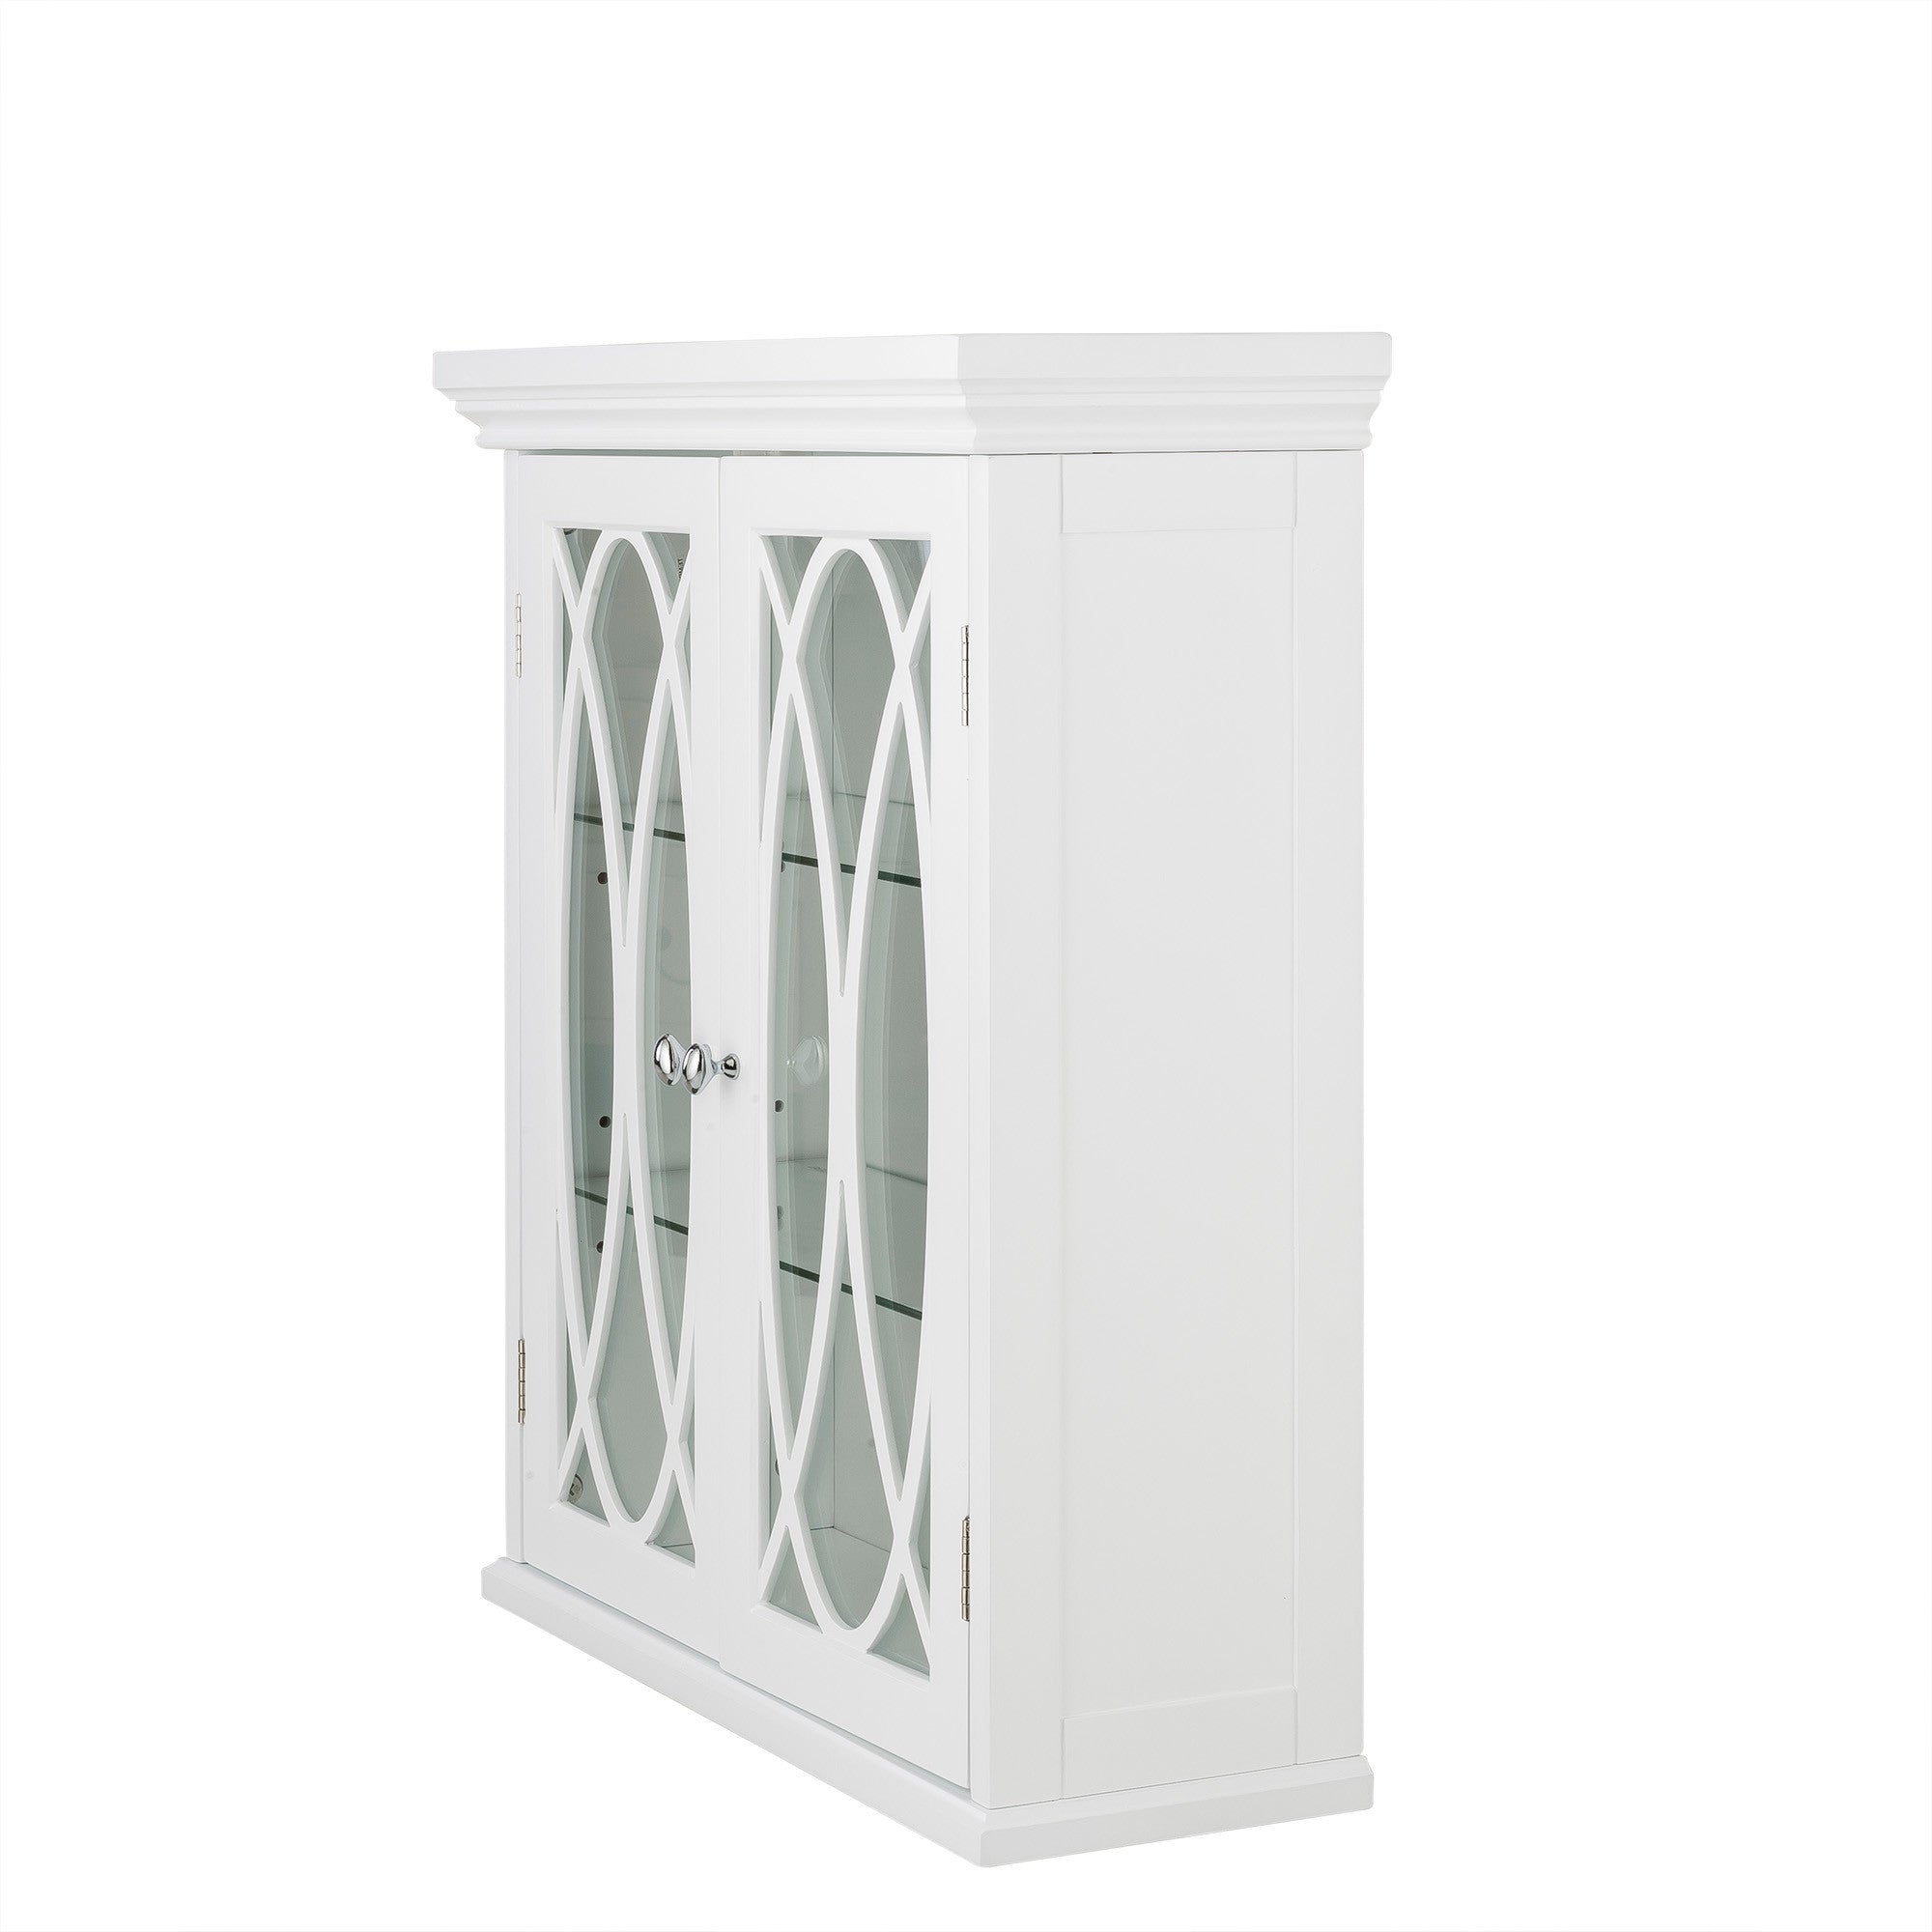 Elegant Home Fashions Florence 2 Door Removable Wooden Wall Cabinet- White